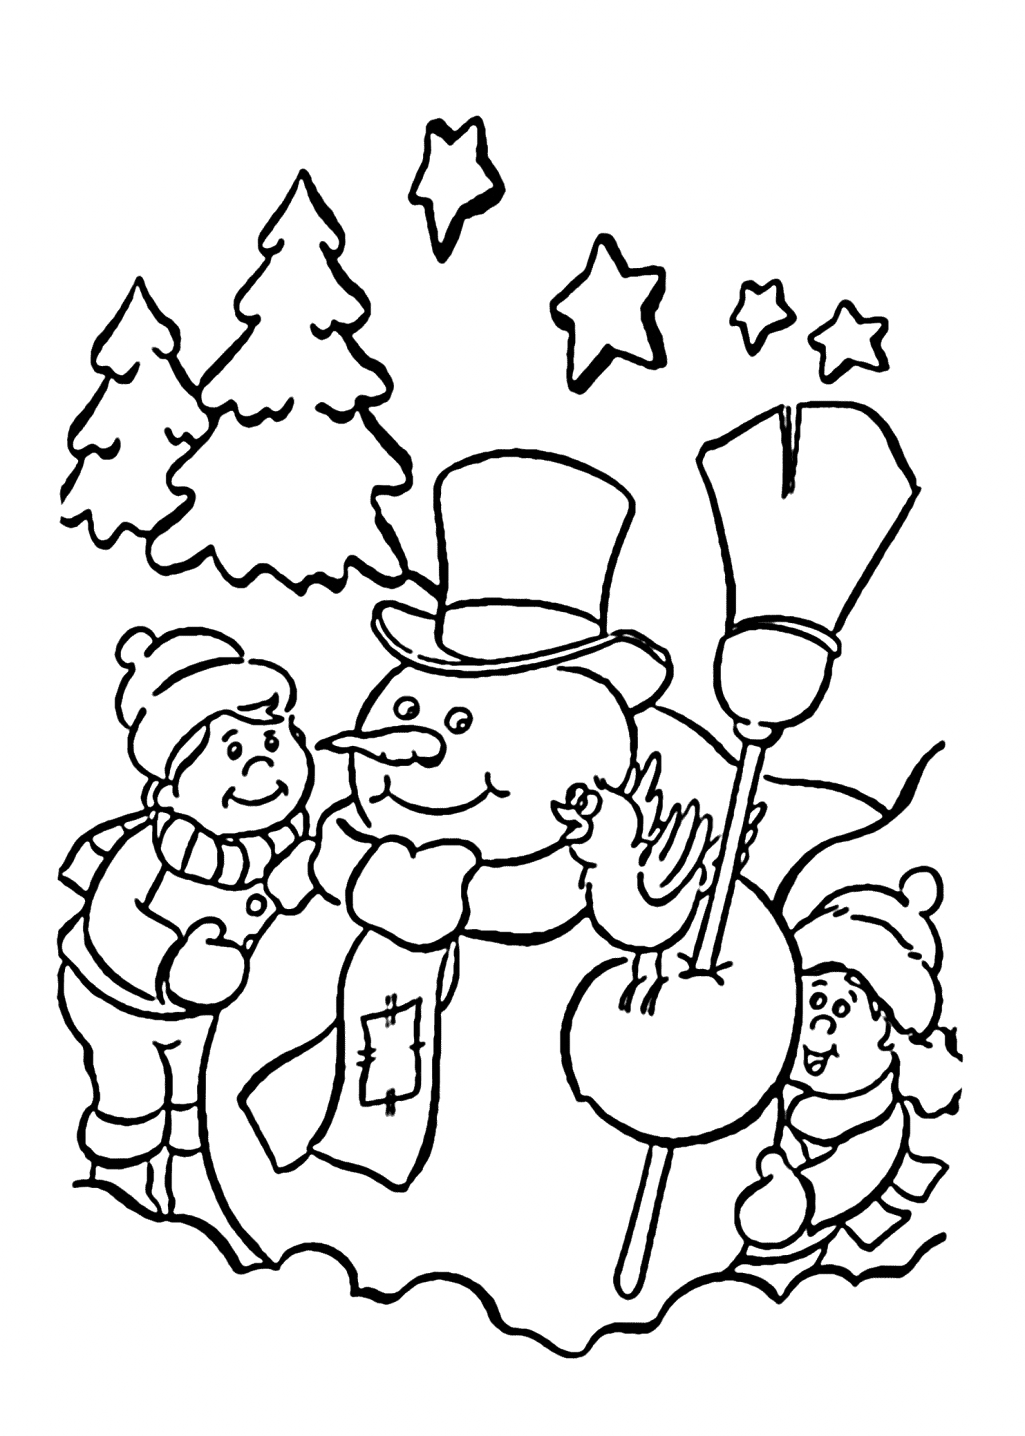 coloring-pages-winter-holidays-coloring-pages